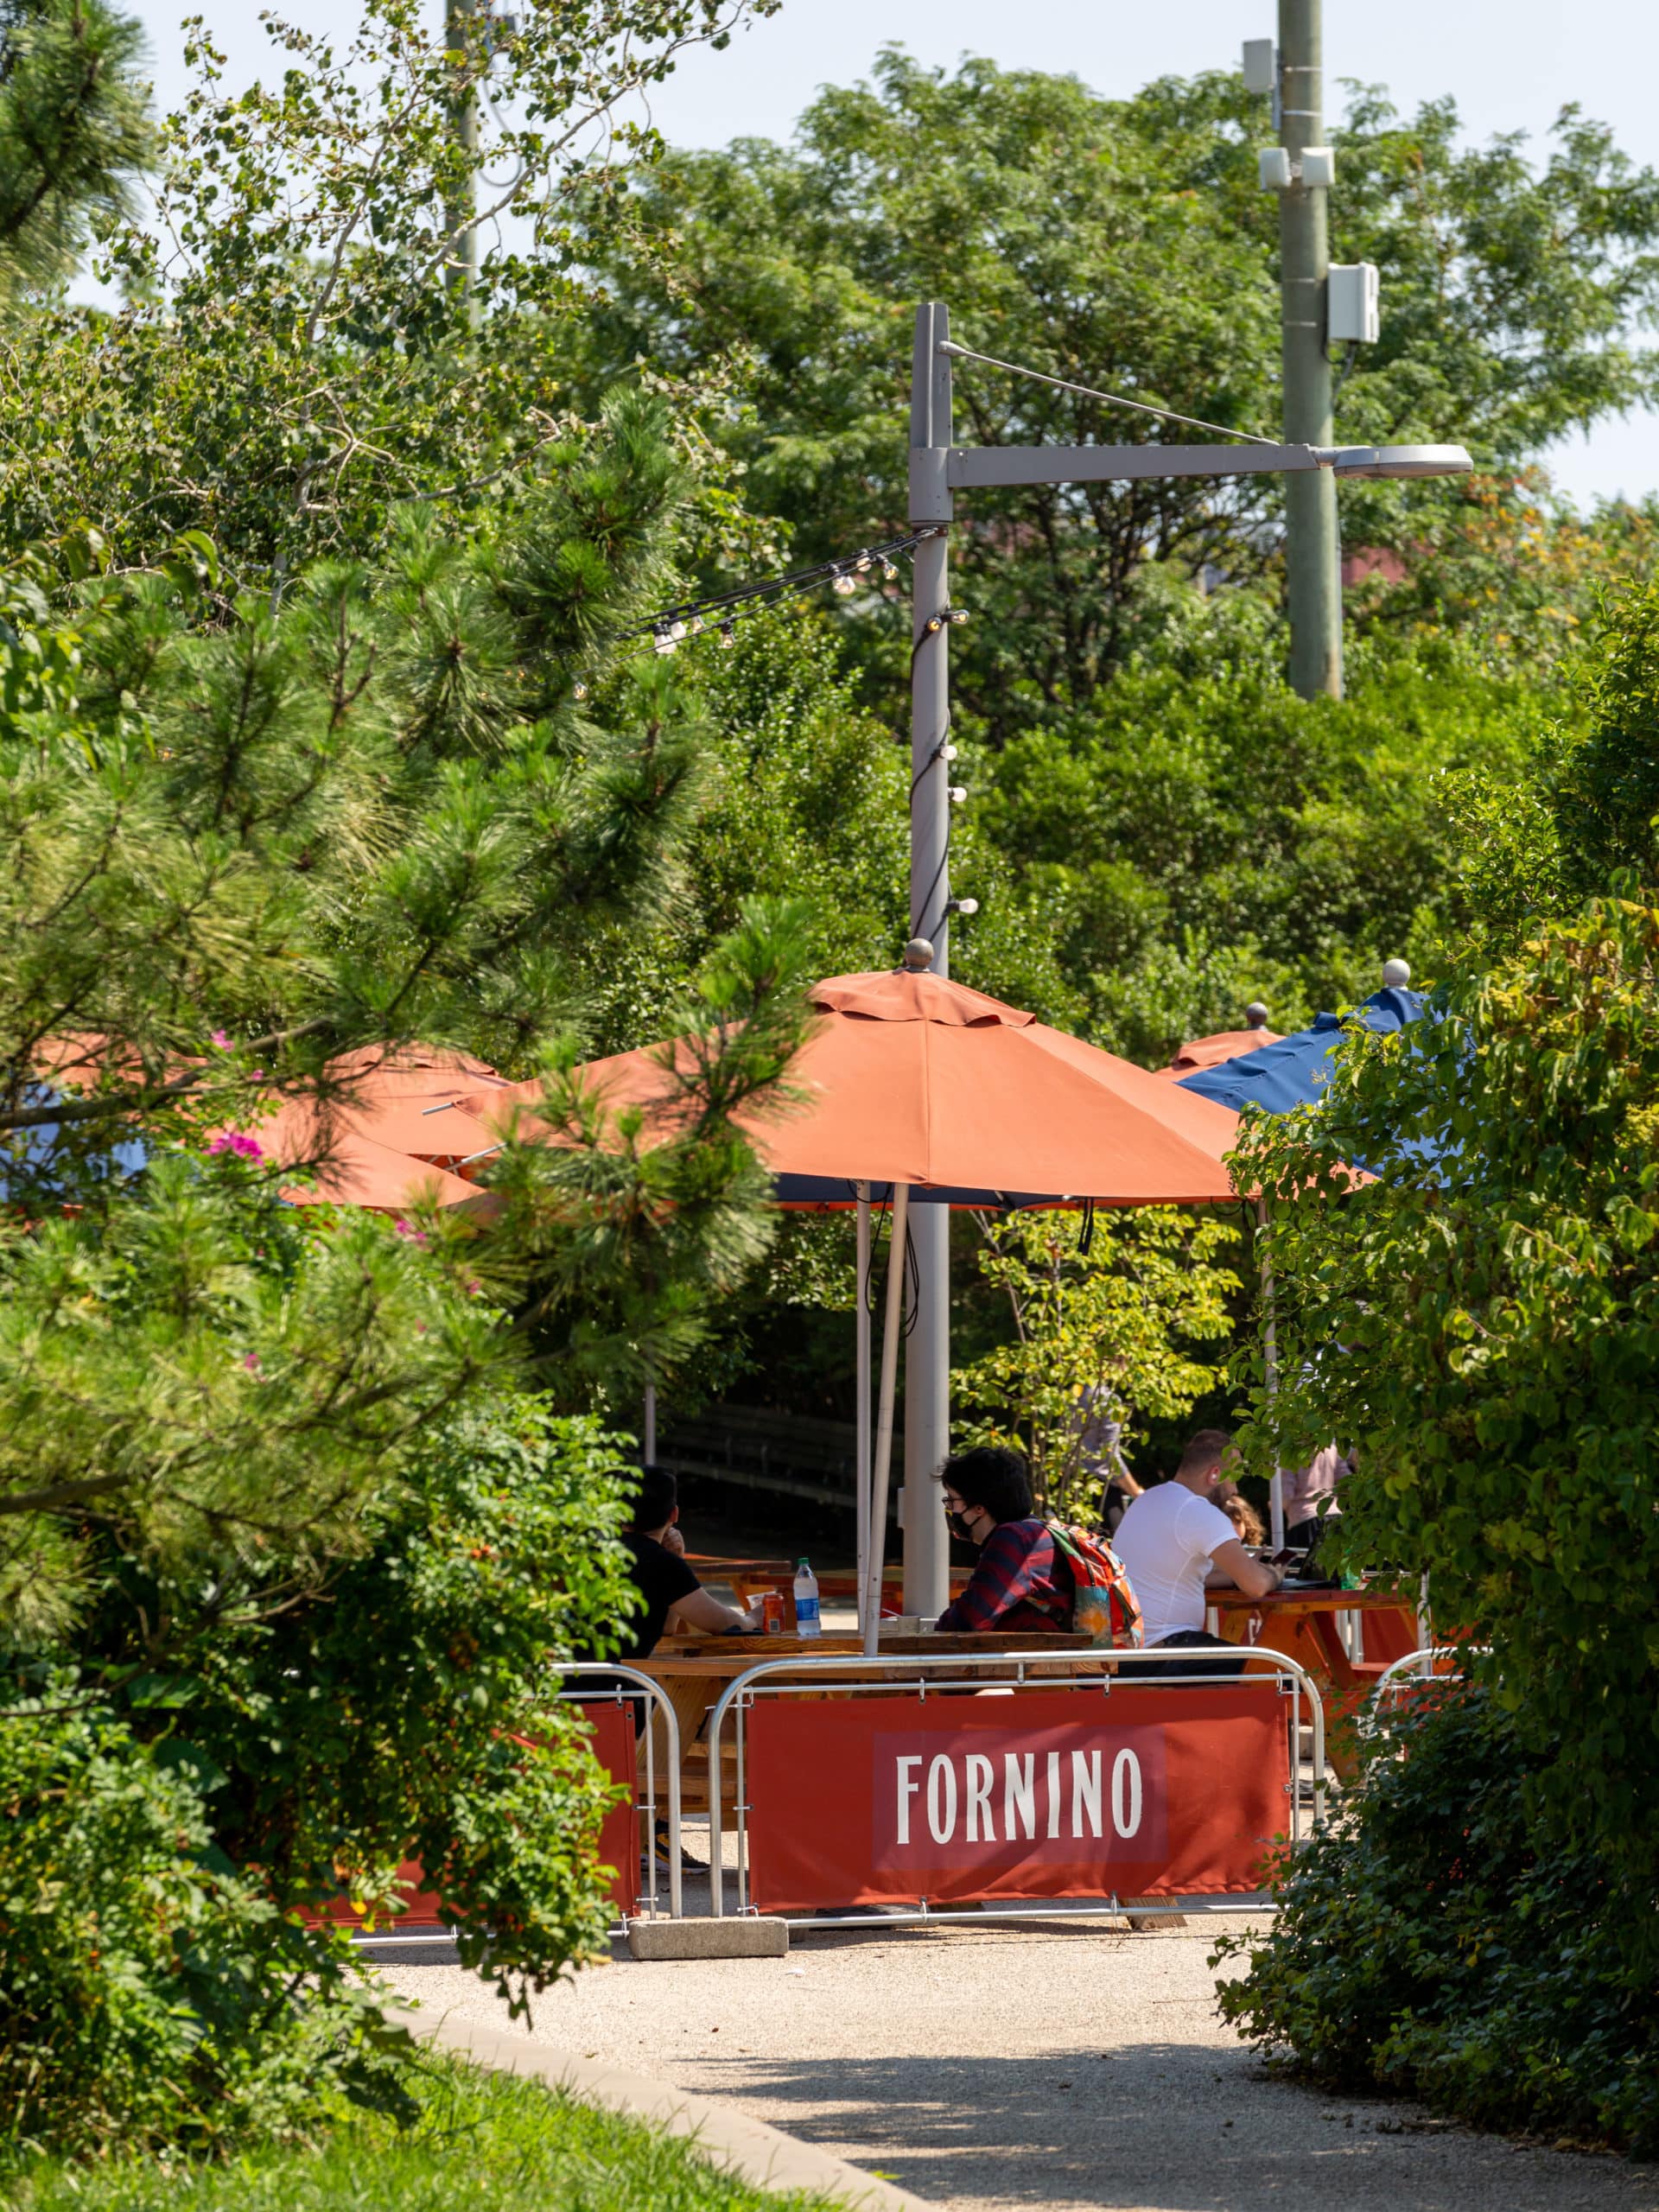 View from tree-lined pathway of people sitting under umbrellas at Fornino on a sunny day.